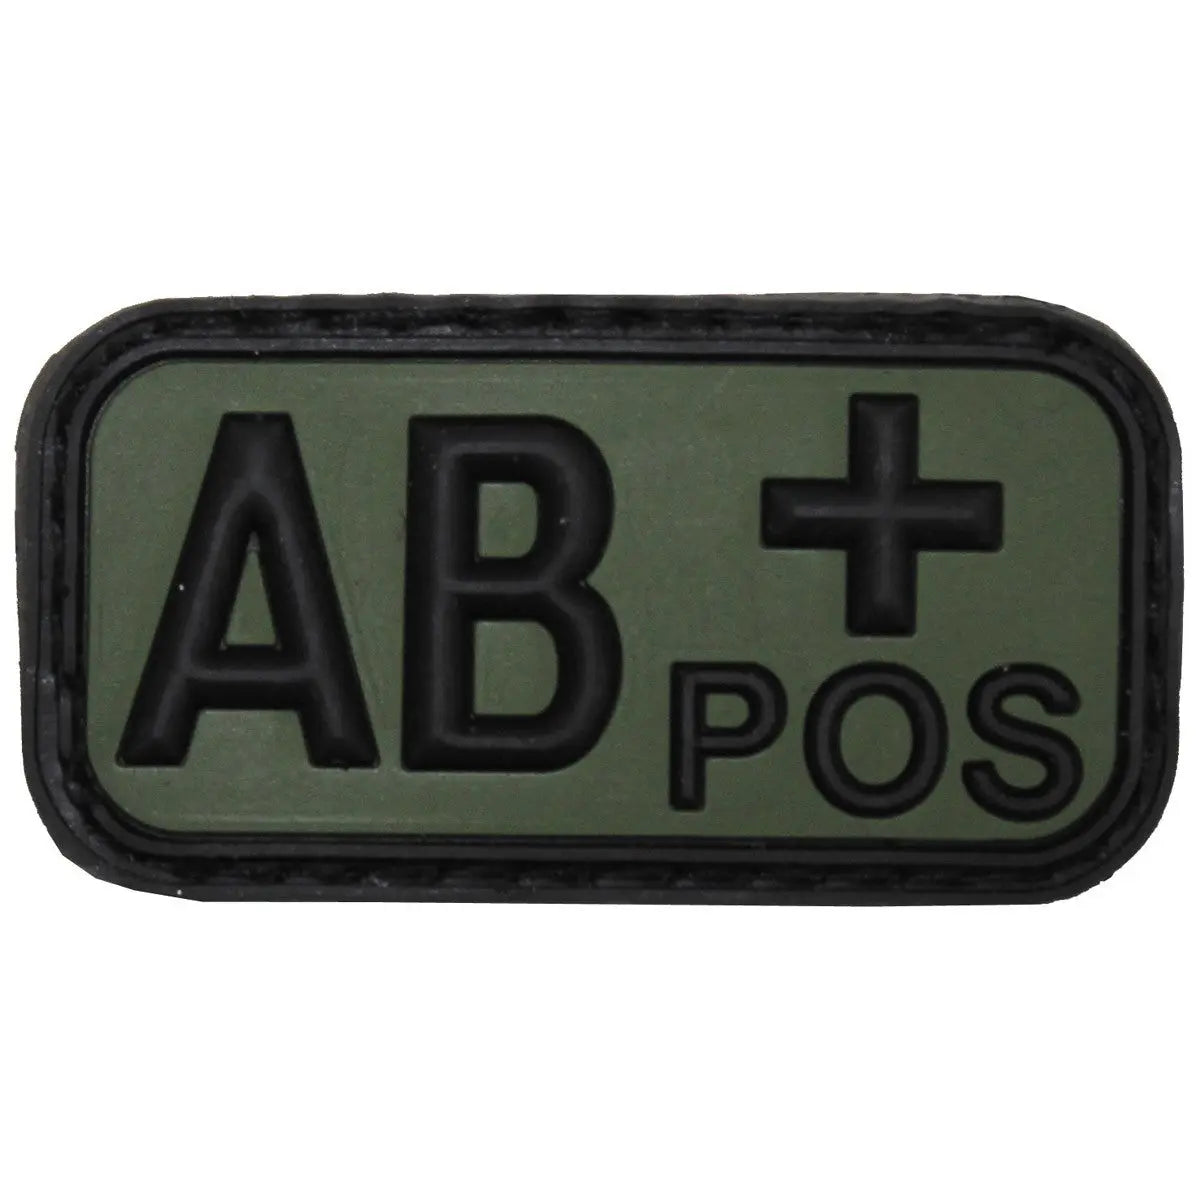 Velcro Patch, black-OD green, blood group "AB POS", 3D